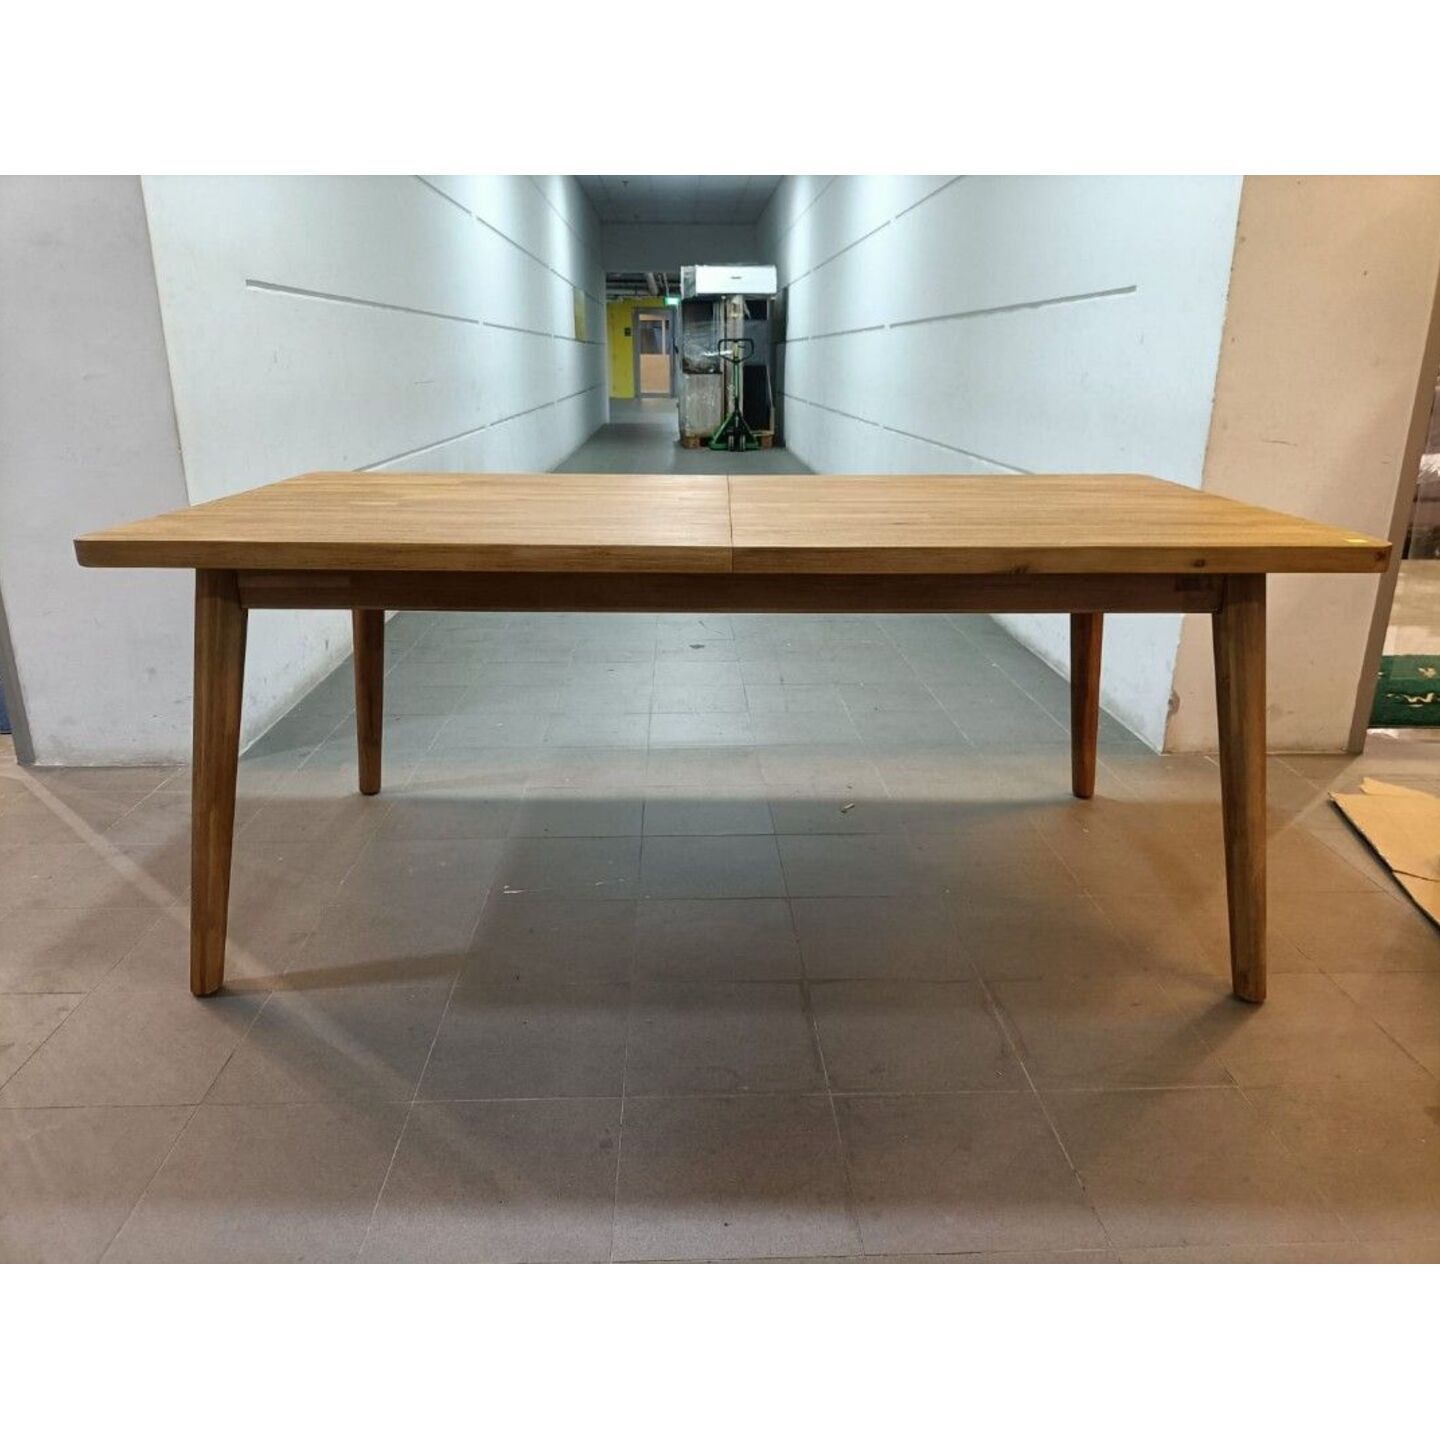 VETTEL ACACIA WOODEN Extendable Dining Table 190-240cm